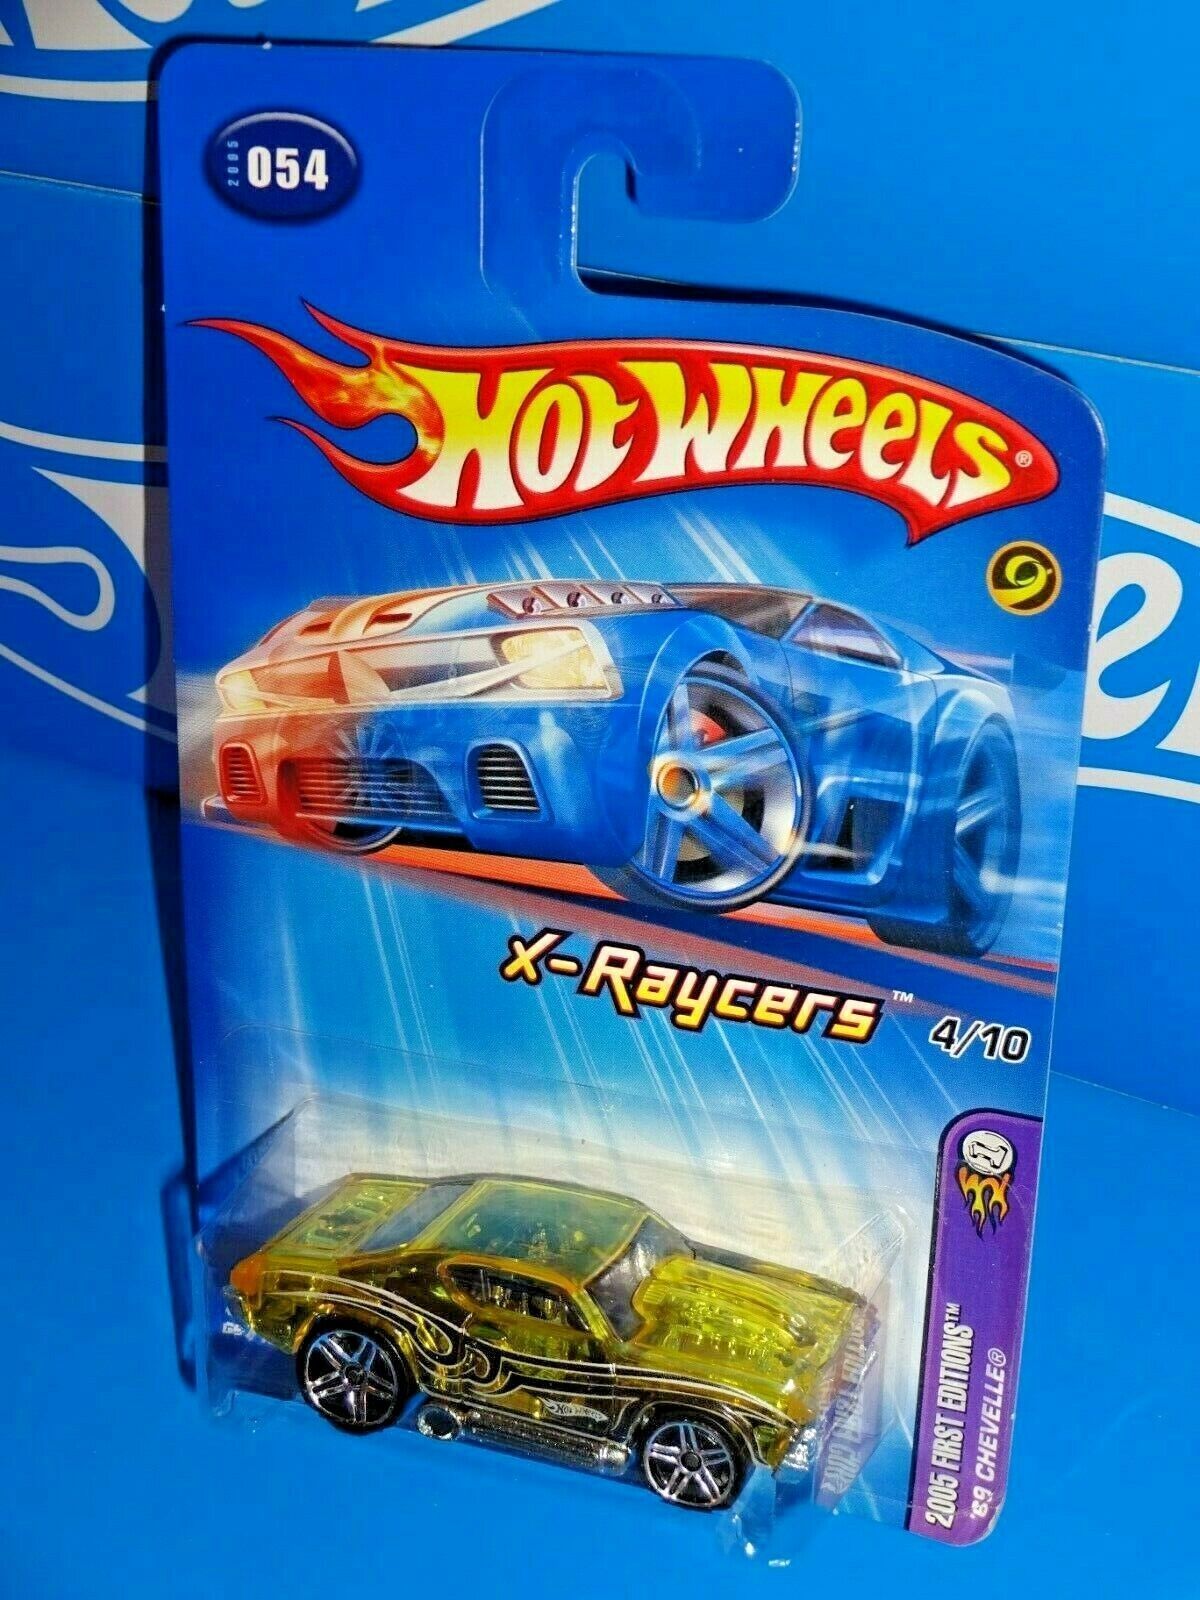 Primary image for Hot Wheels 2005 First Editions X-Raycers #54 '69 Chevelle Yellow w/ PR5s